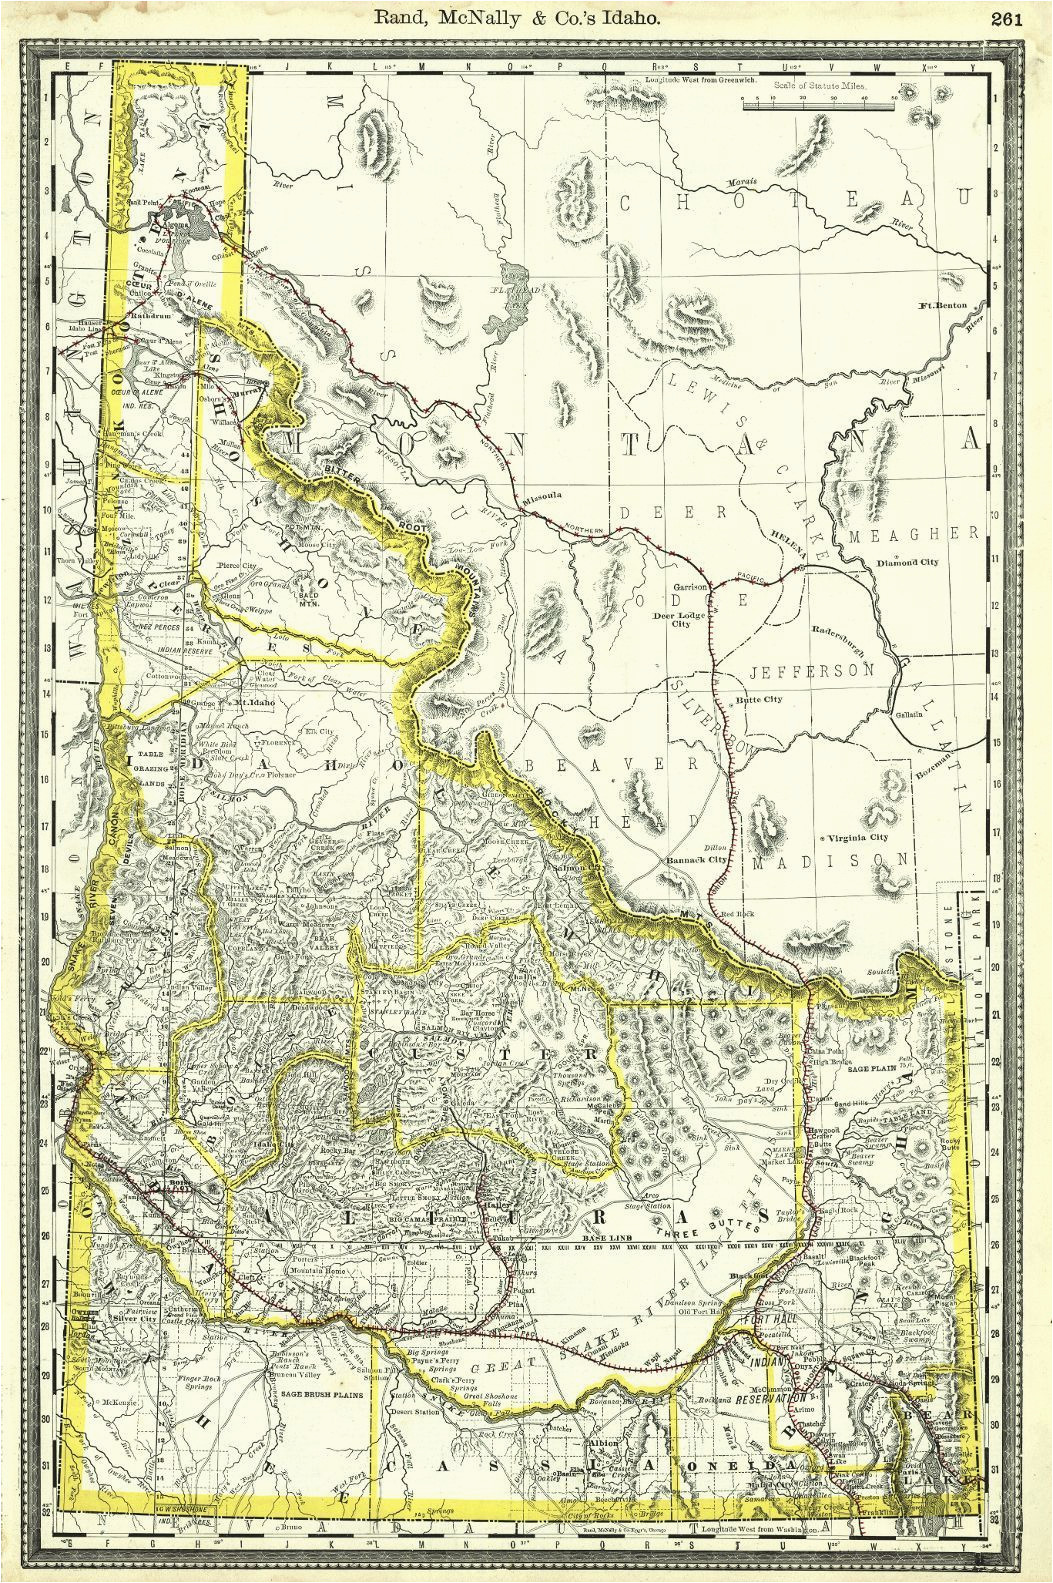 map antique rand mcnally and co s idaho c1889 map from the